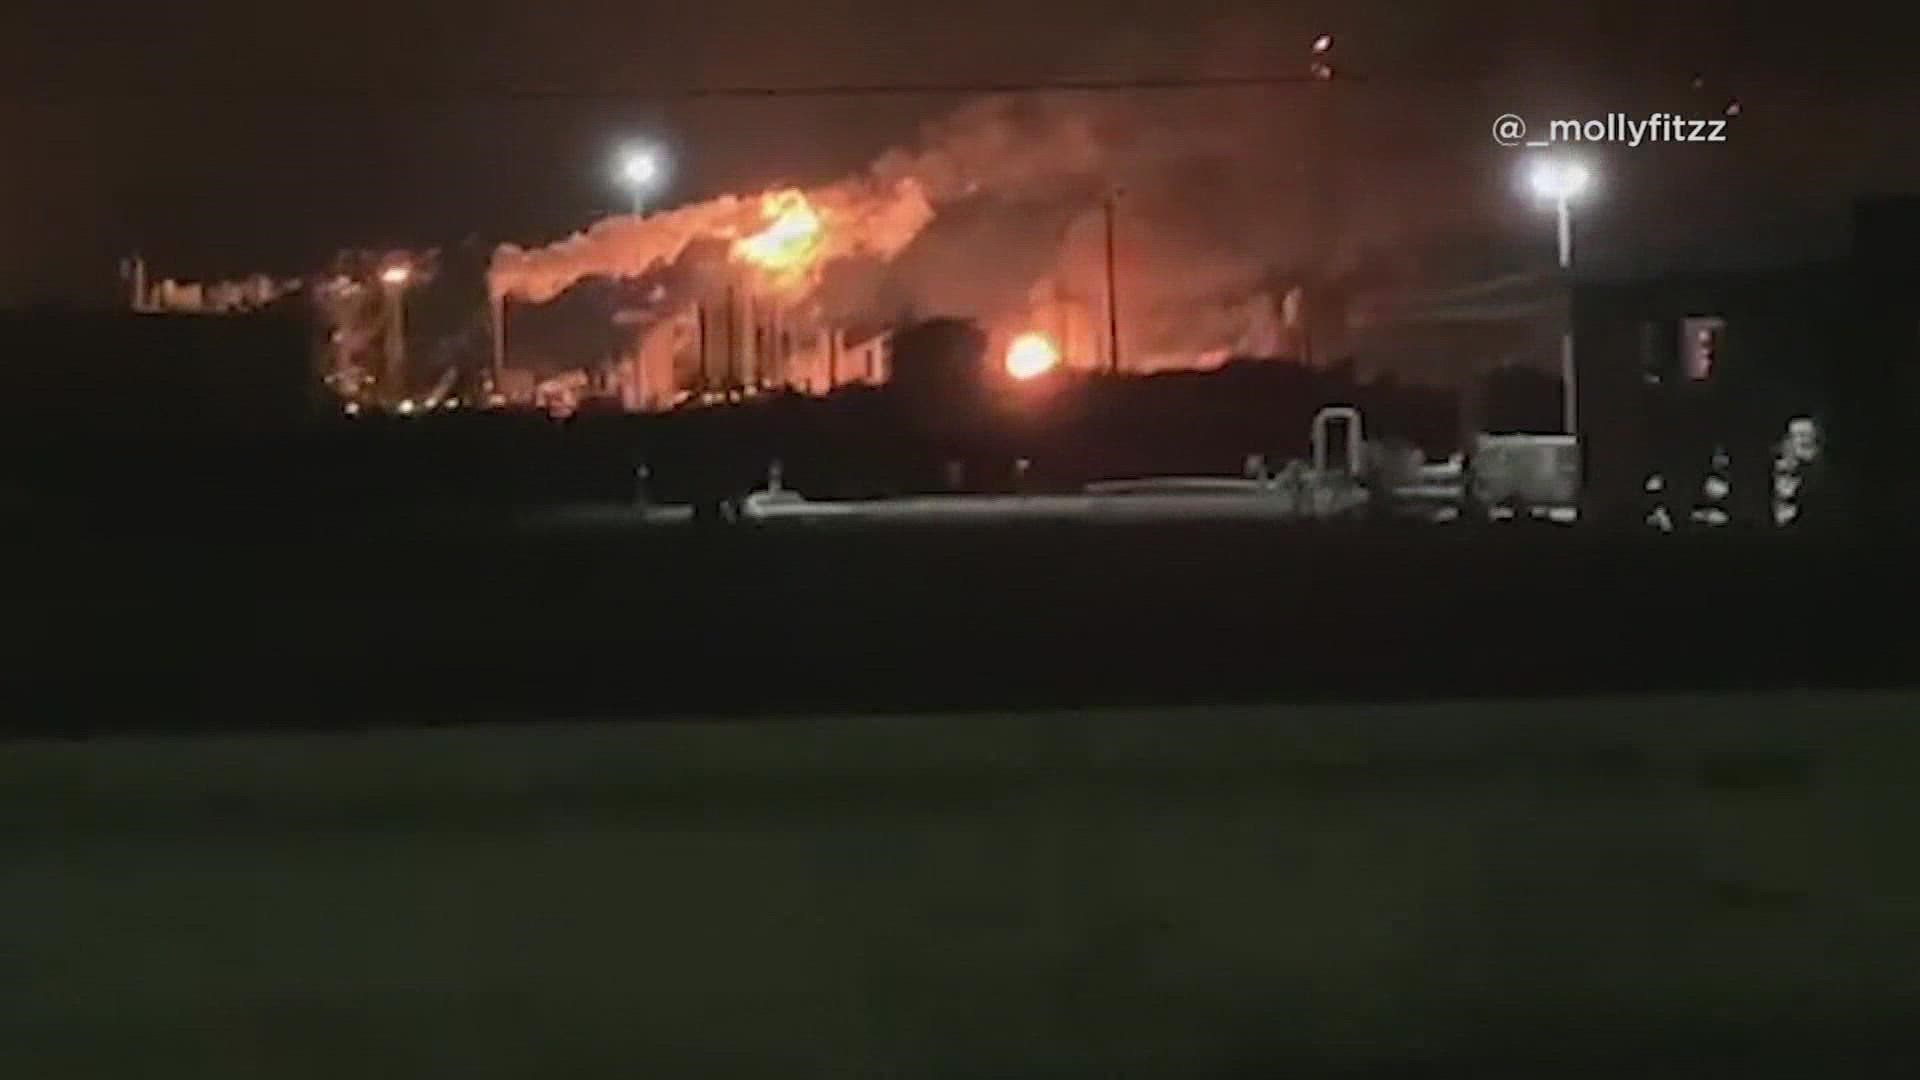 Videos showed us what Baytown residents, who were either awake or woke up, saw when a fire erupted at the ExxonMobil refinery Thursday morning.